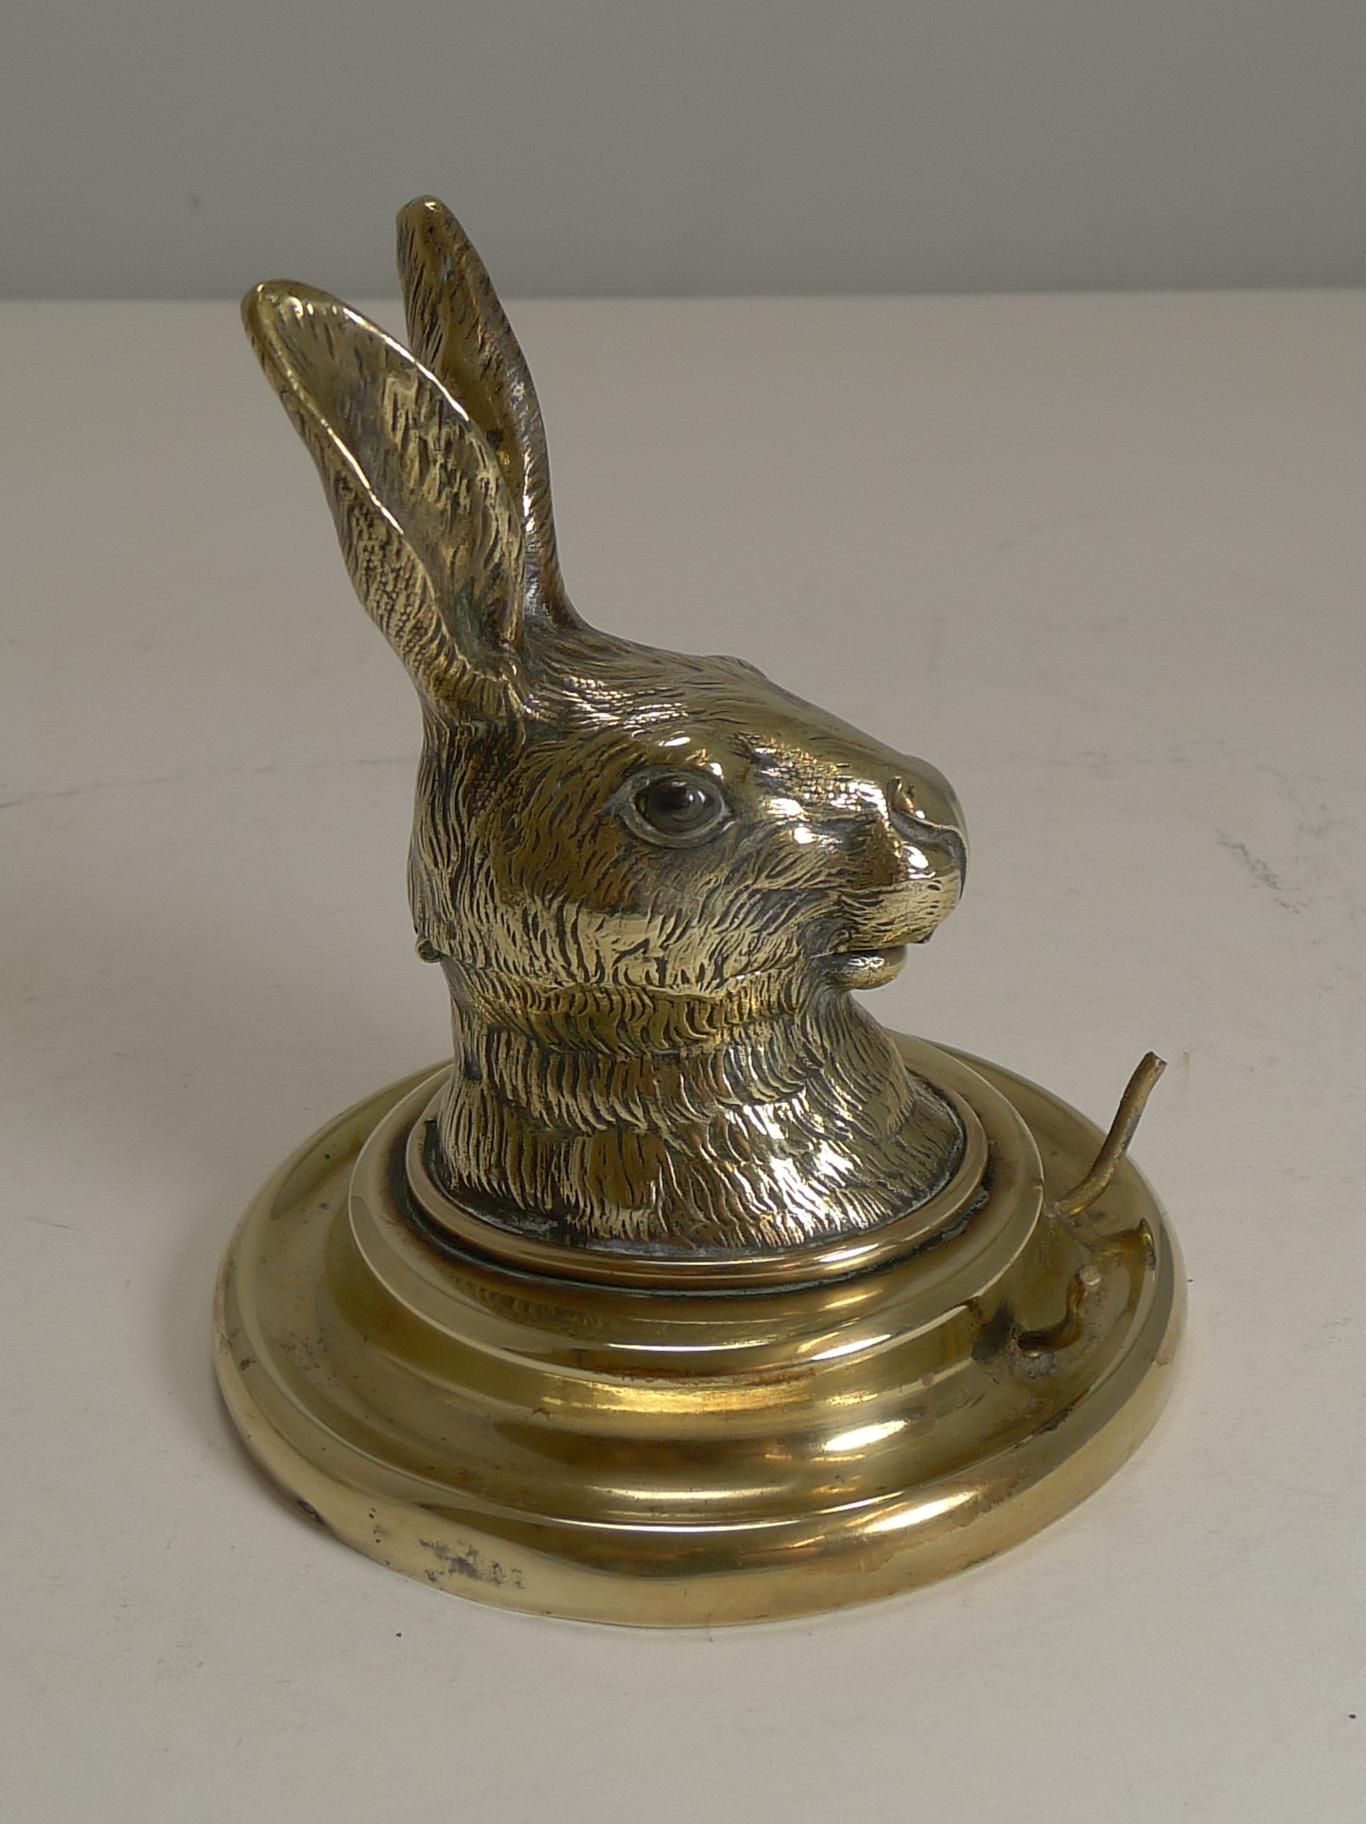 A charming and scarce inkwell made from polished English brass featuring a beautifully cast Hare's head.

At first I thought he sported glass eyes but taking a closer look, they look to be a polished stone carved to create a realistic eye. The